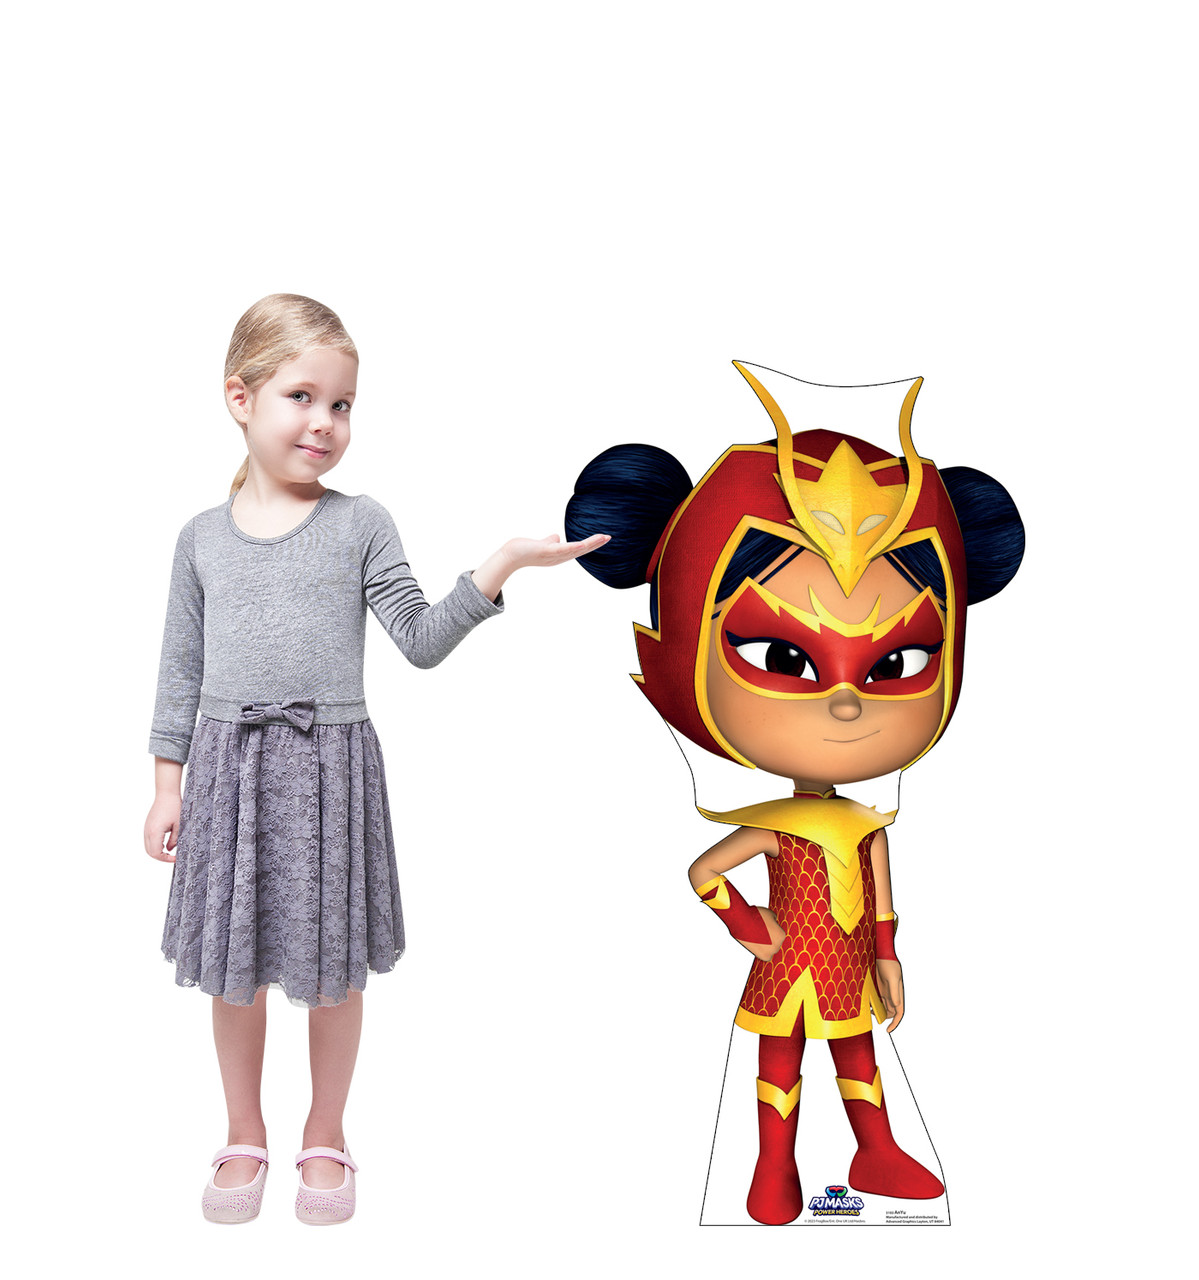 Life-size cardboard standee of An Yu from PJ Masks Power Heroes with model.